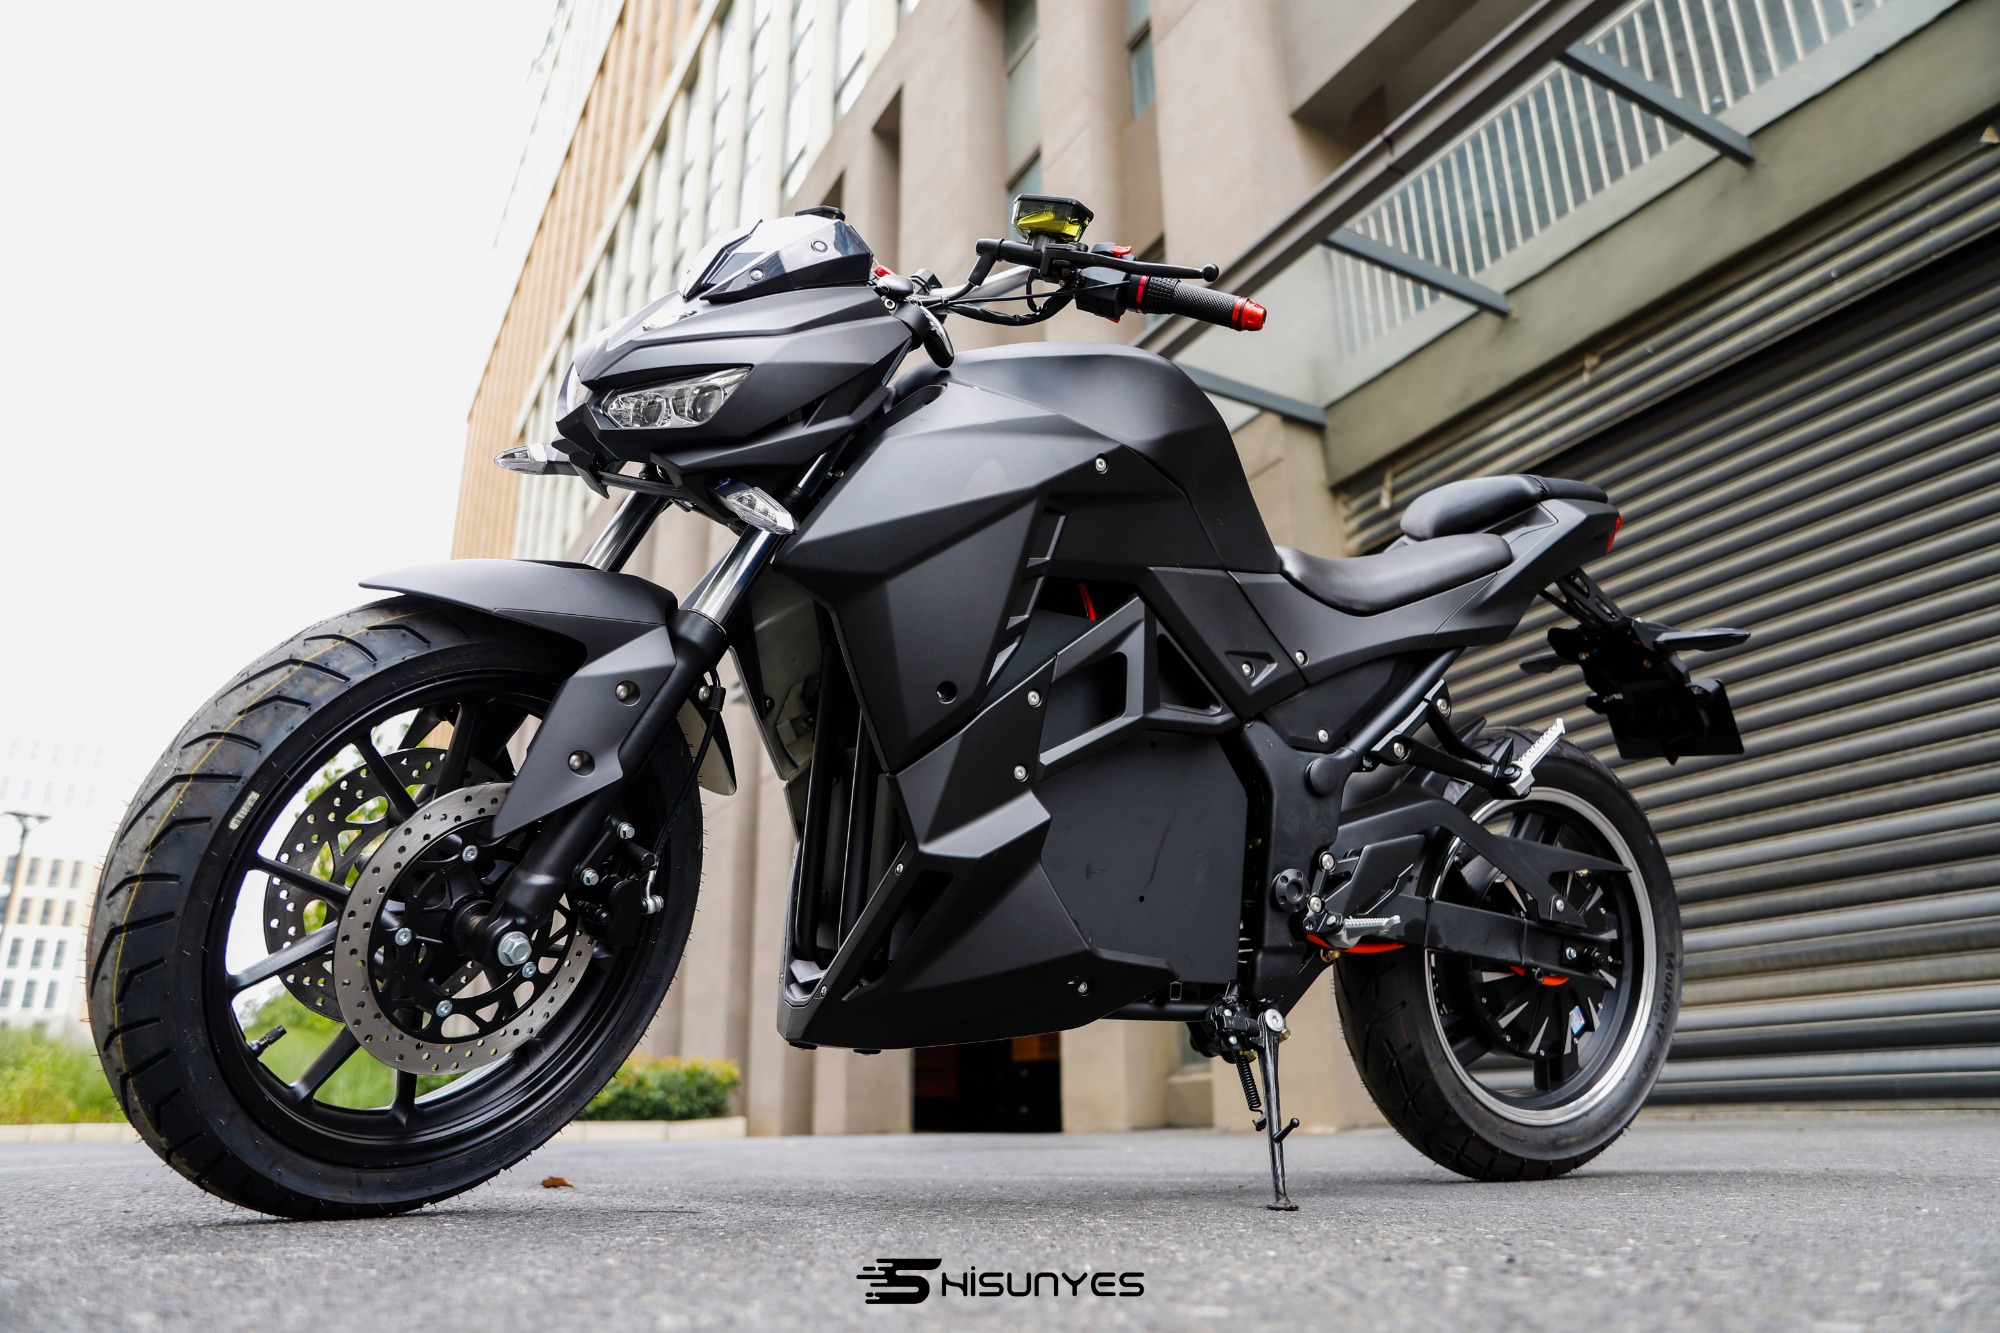 The new electric motorcycle v13 is a superbike